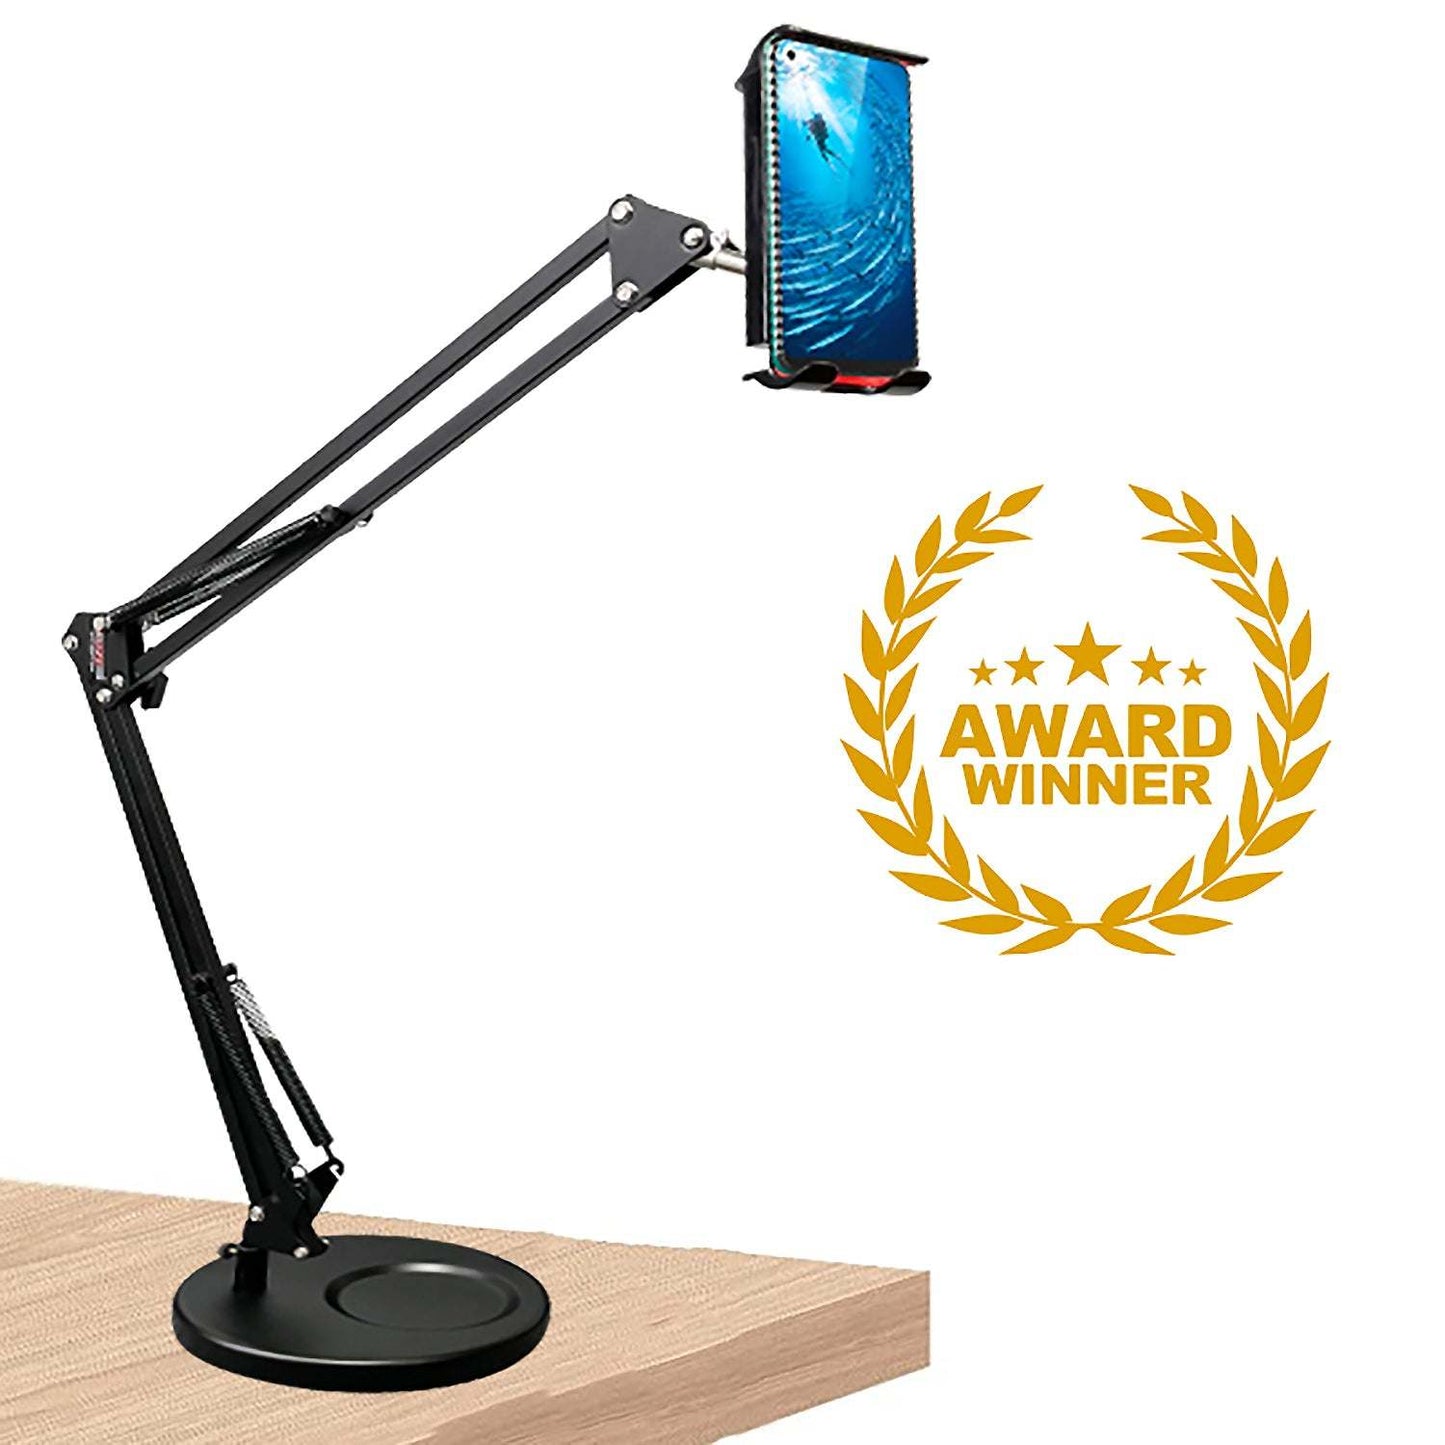 Phone Stand Mount for Desk ARM MOB